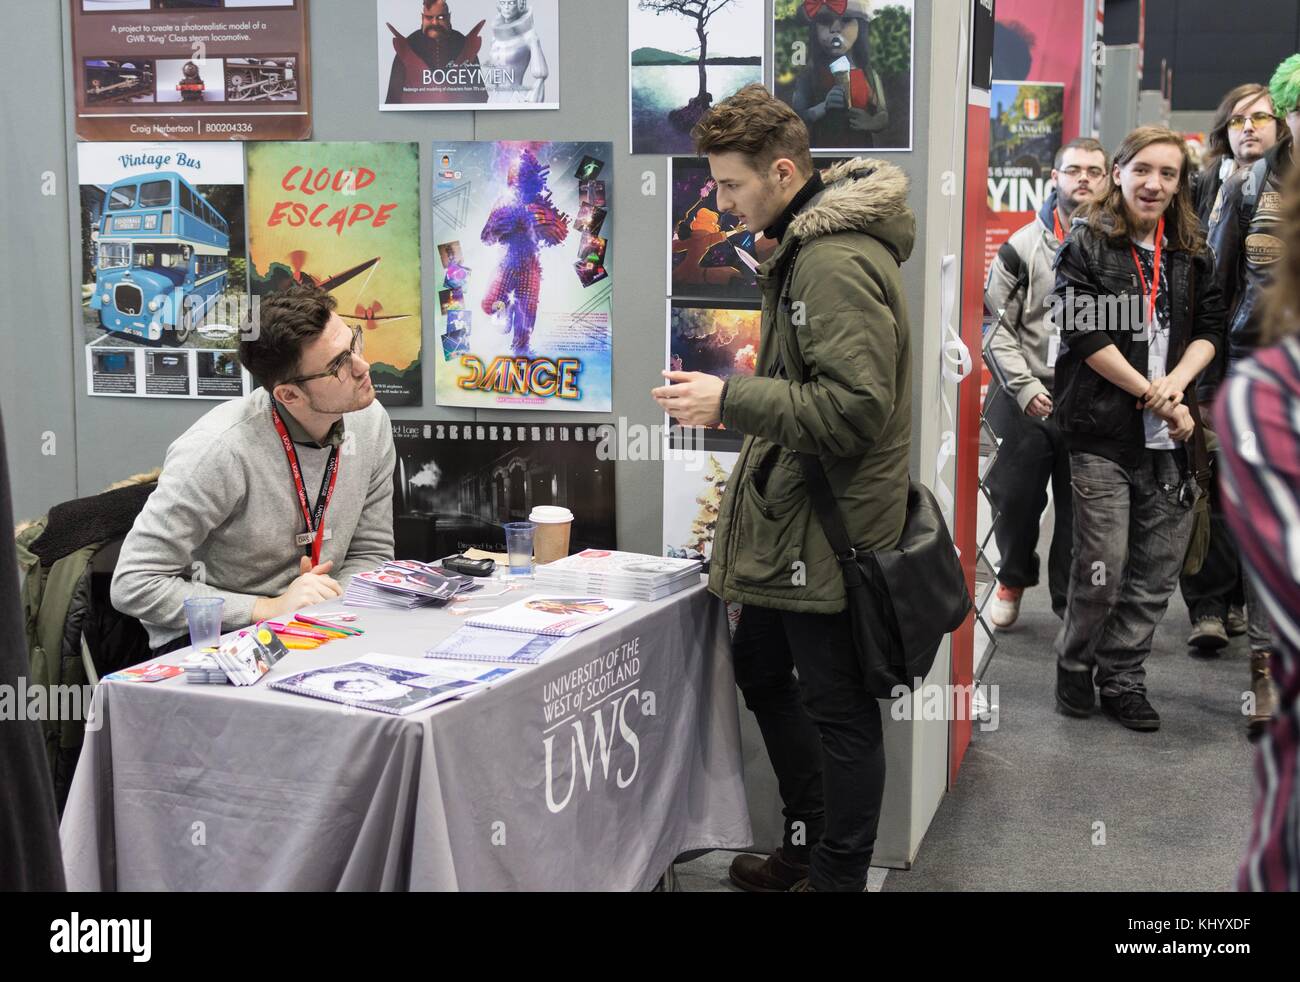 Manchester, UK. 22nd November 2017. UCAS Higher Education Event. Manchester Central Convention Complex.  Thousands of prospective students from across the country attend day of the annual Creative Arts UCAS H.E. event to discuss options with the various Universities and Colleges that are exhibiting. Stock Photo